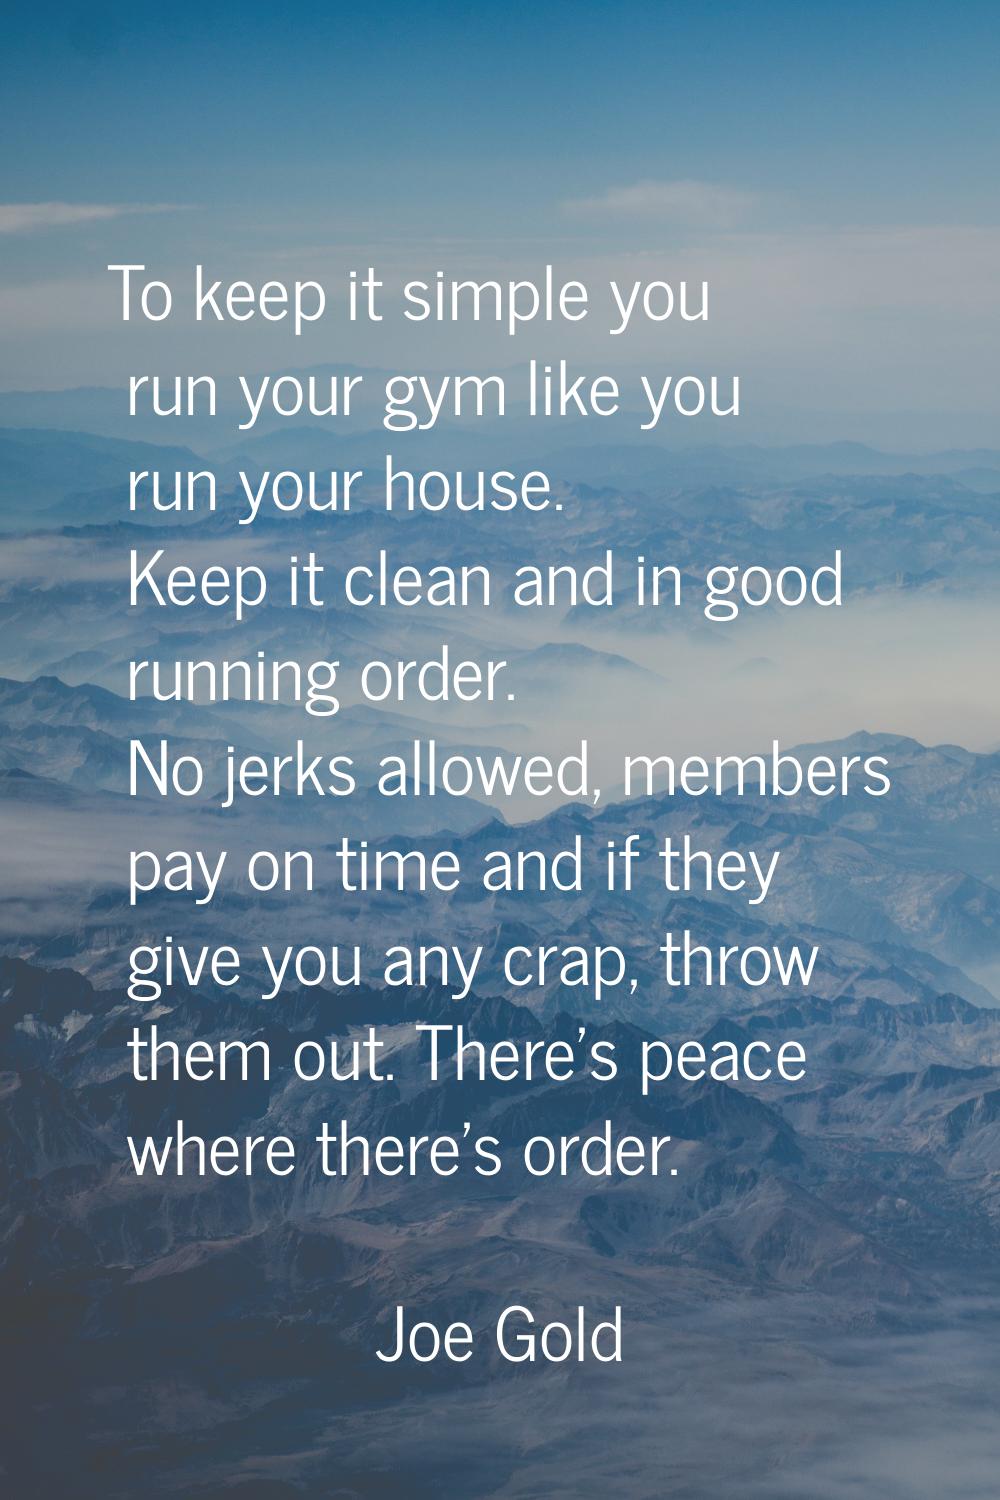 To keep it simple you run your gym like you run your house. Keep it clean and in good running order